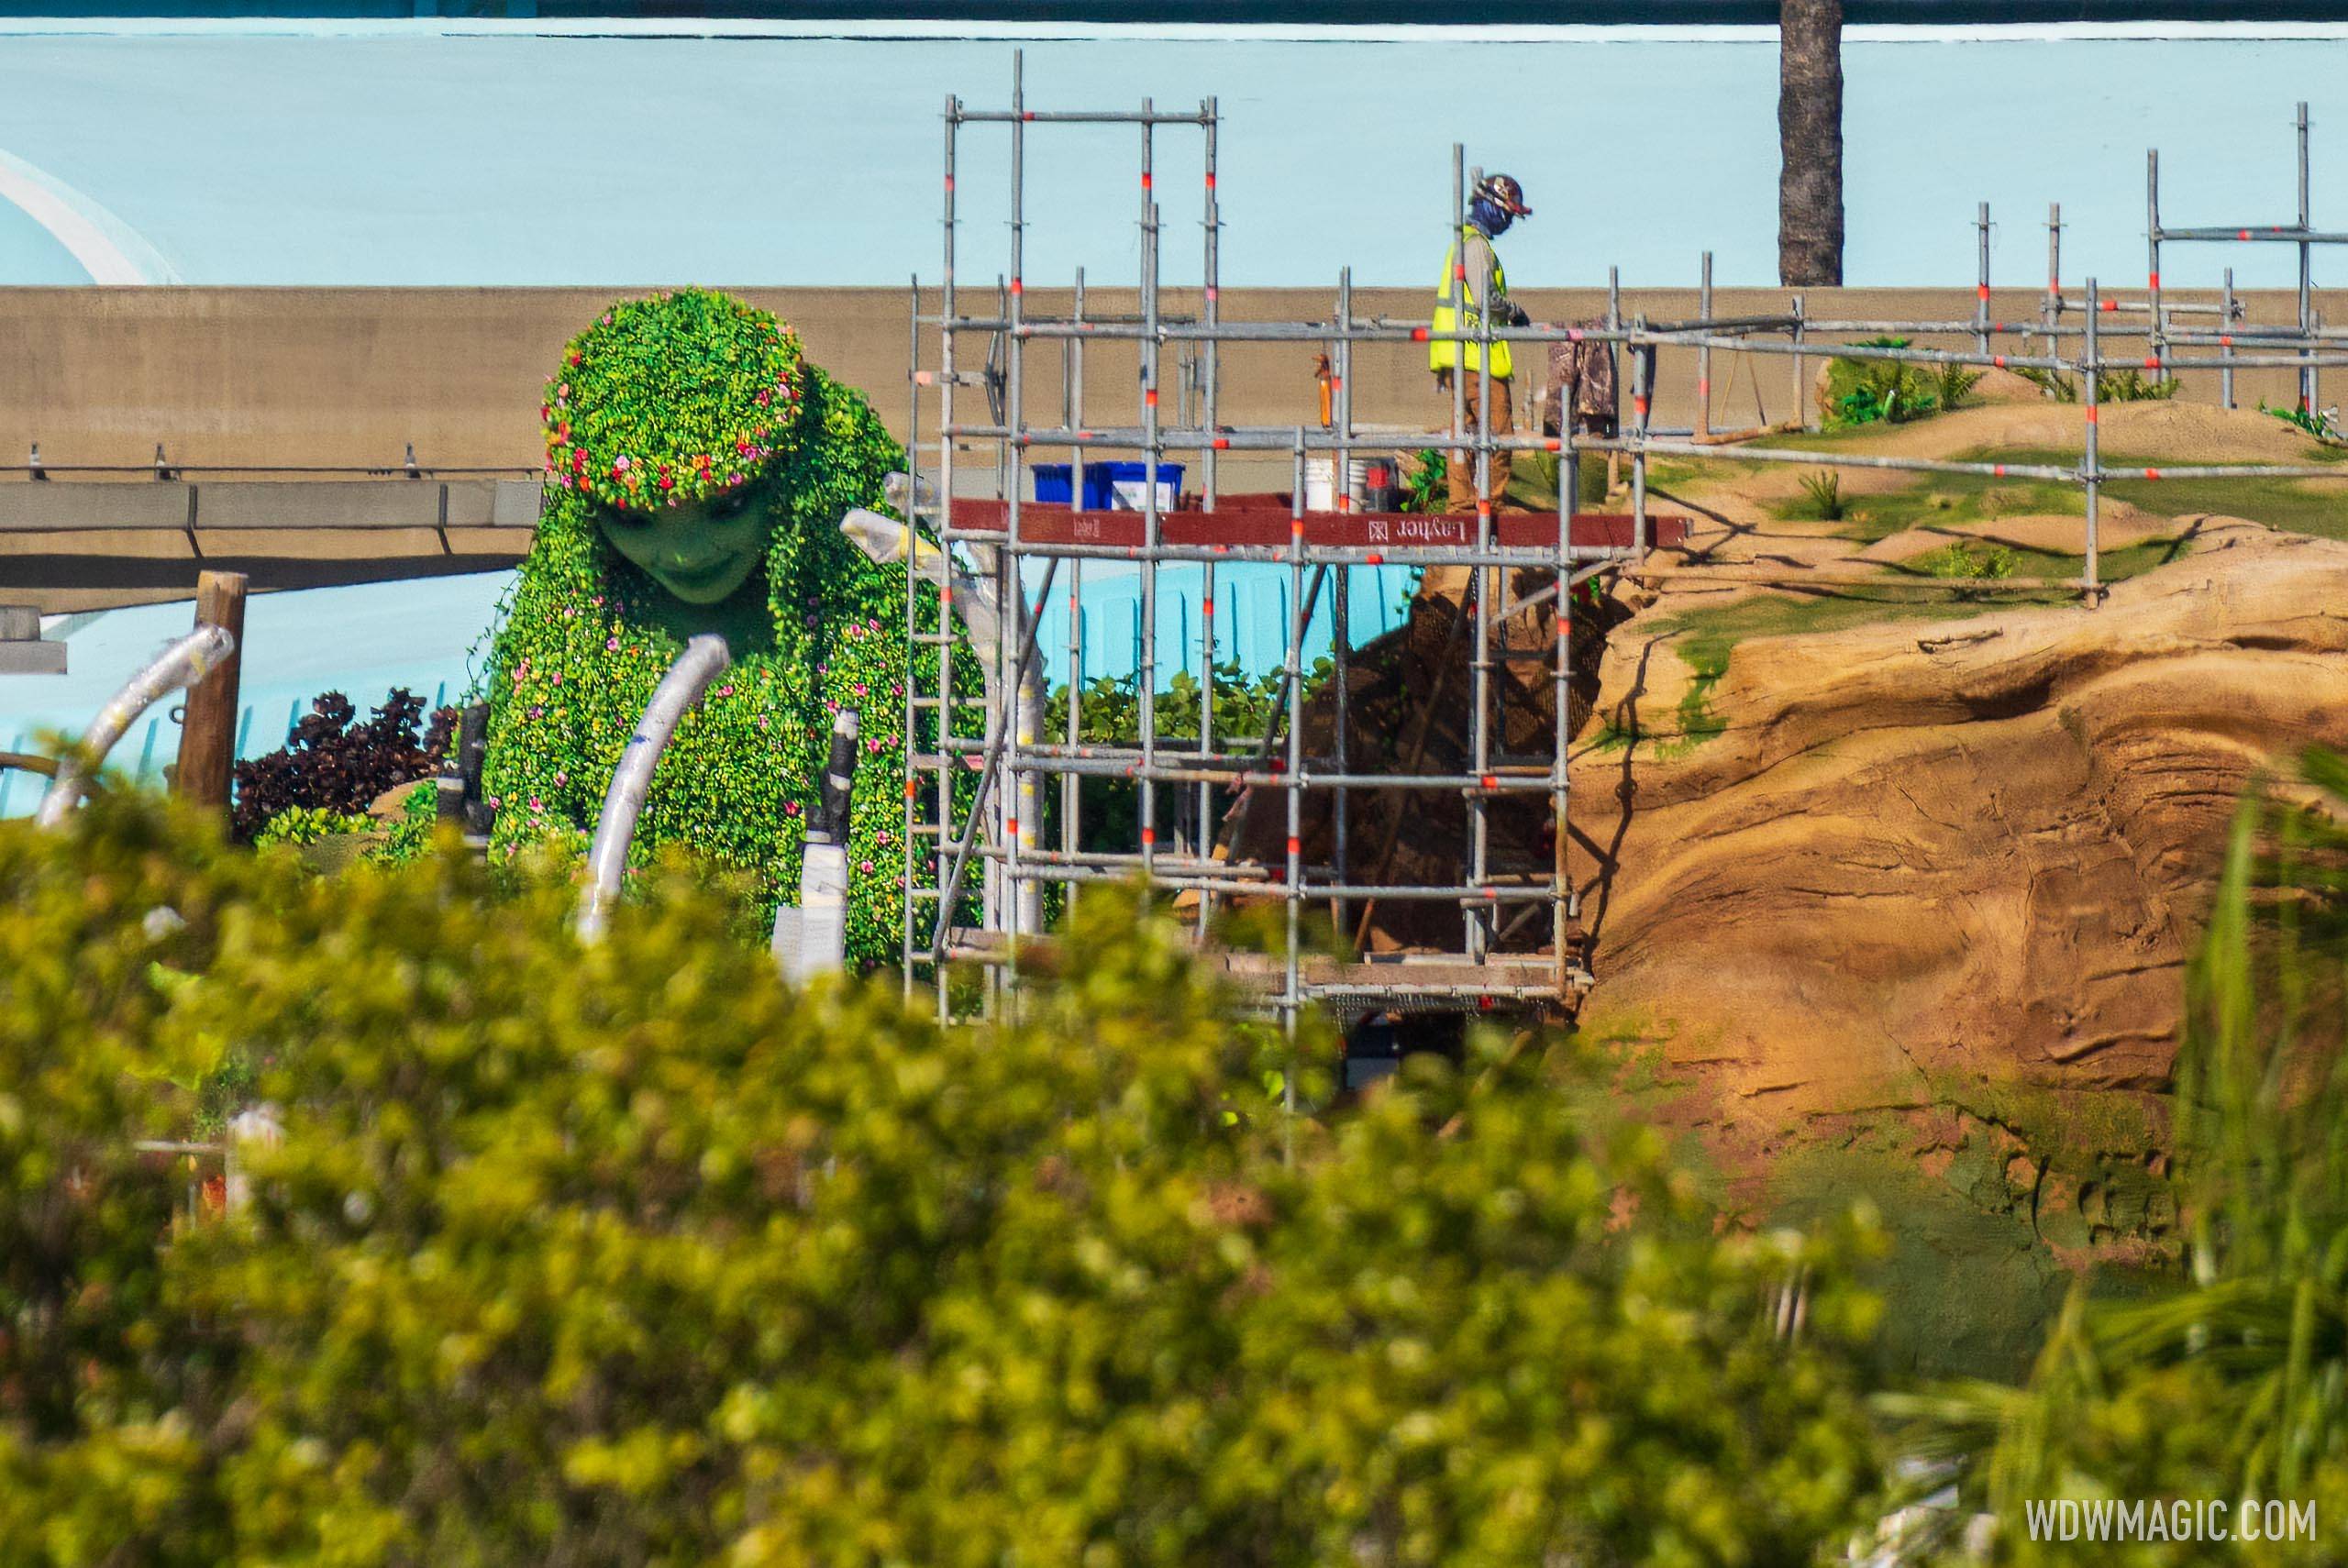 New Walt Disney World Imagineering video goes behind-the-scenes creating Te Fiti at EPCOT's Journey of Water Inspired by Moana